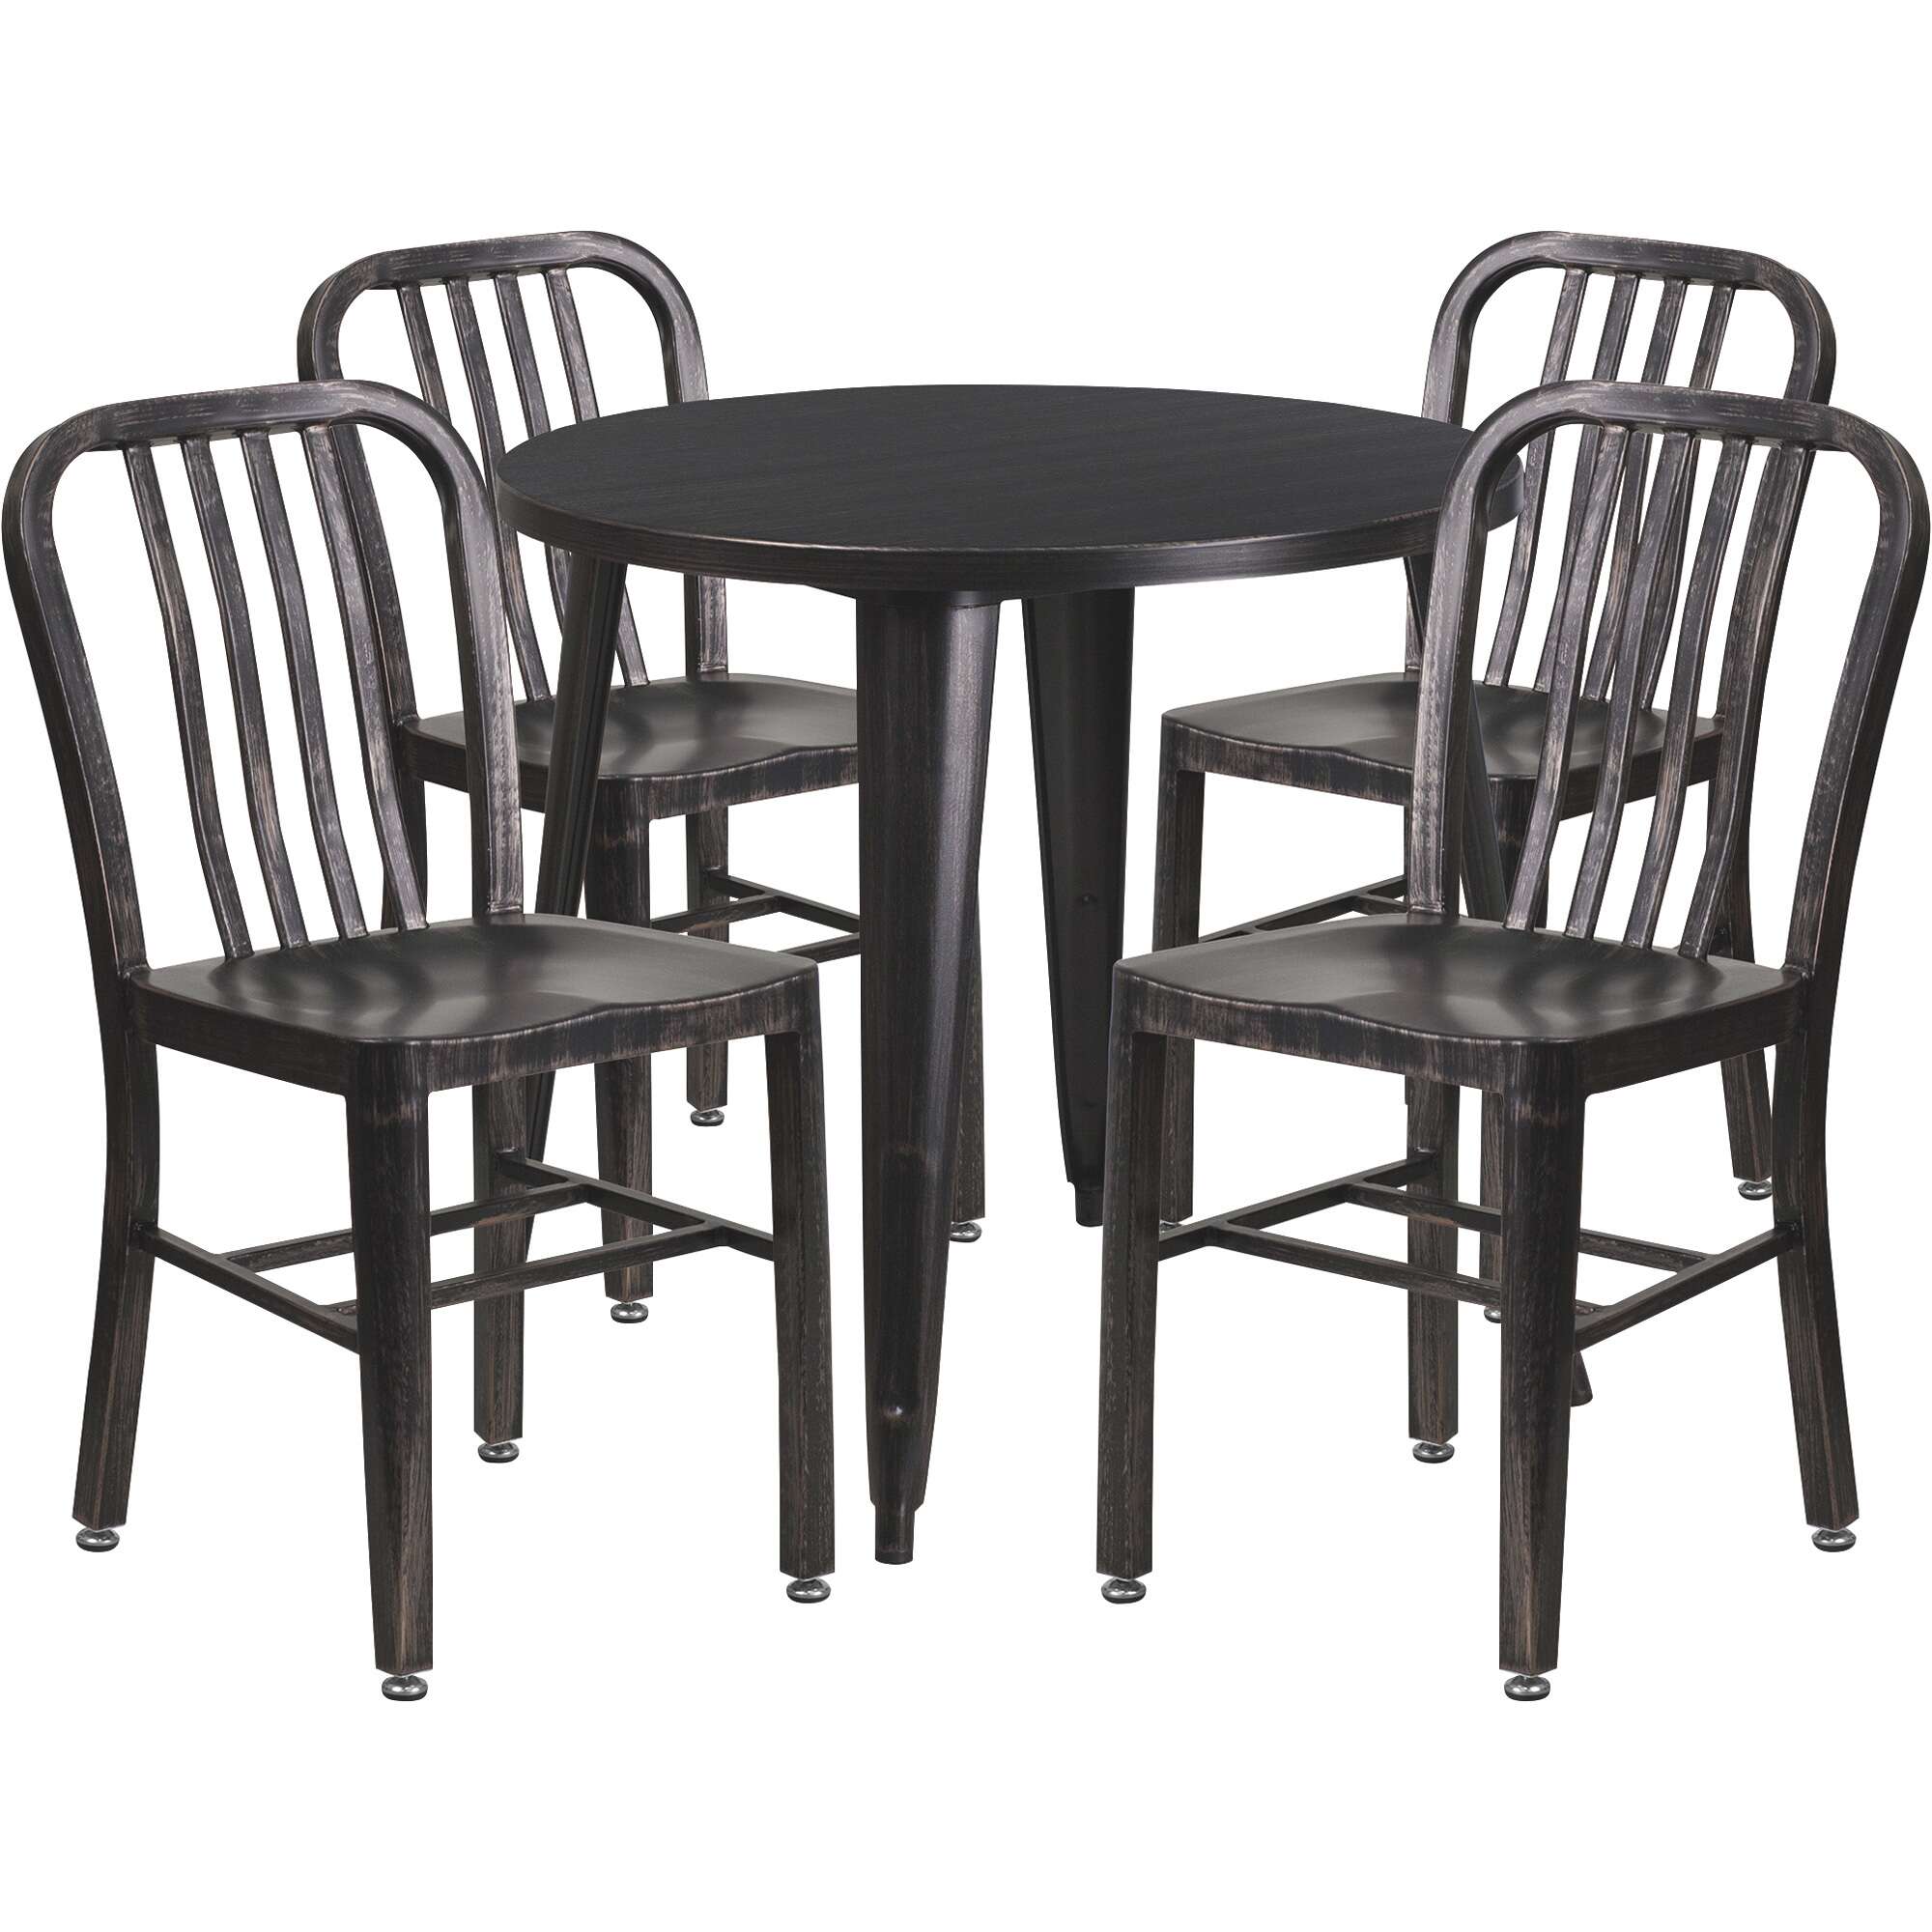 Flash Furniture 5Pc Metal Dining Set 30in Round x 29.5in H Table with 4 Industrial Style Chairs